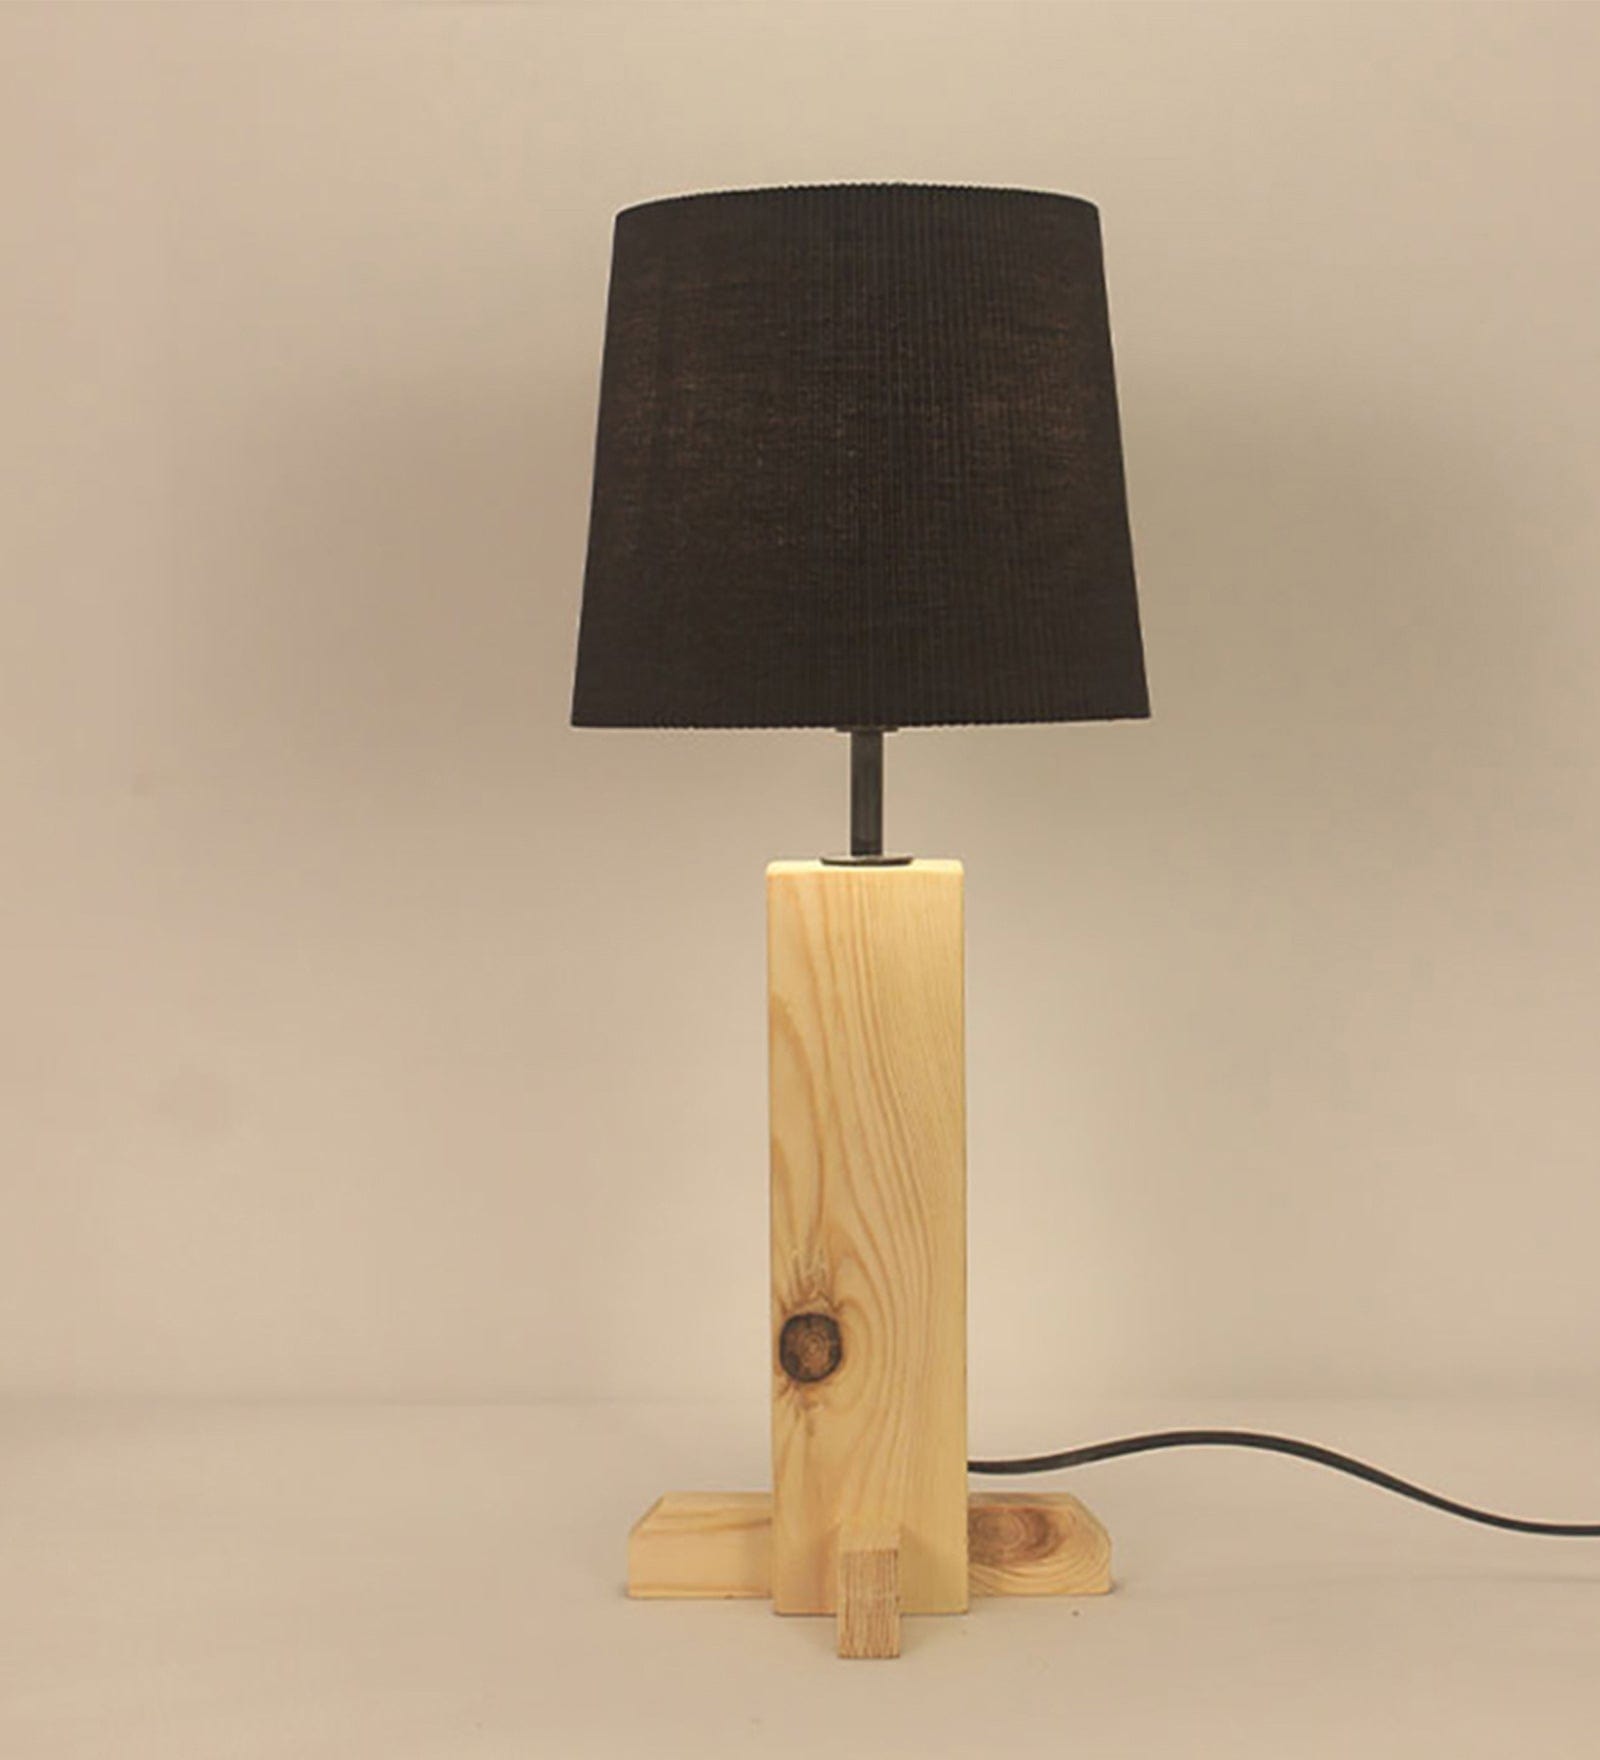 Rocket Beige Wooden Table Lamp with Black Fabric Lampshade (BULB NOT INCLUDED)